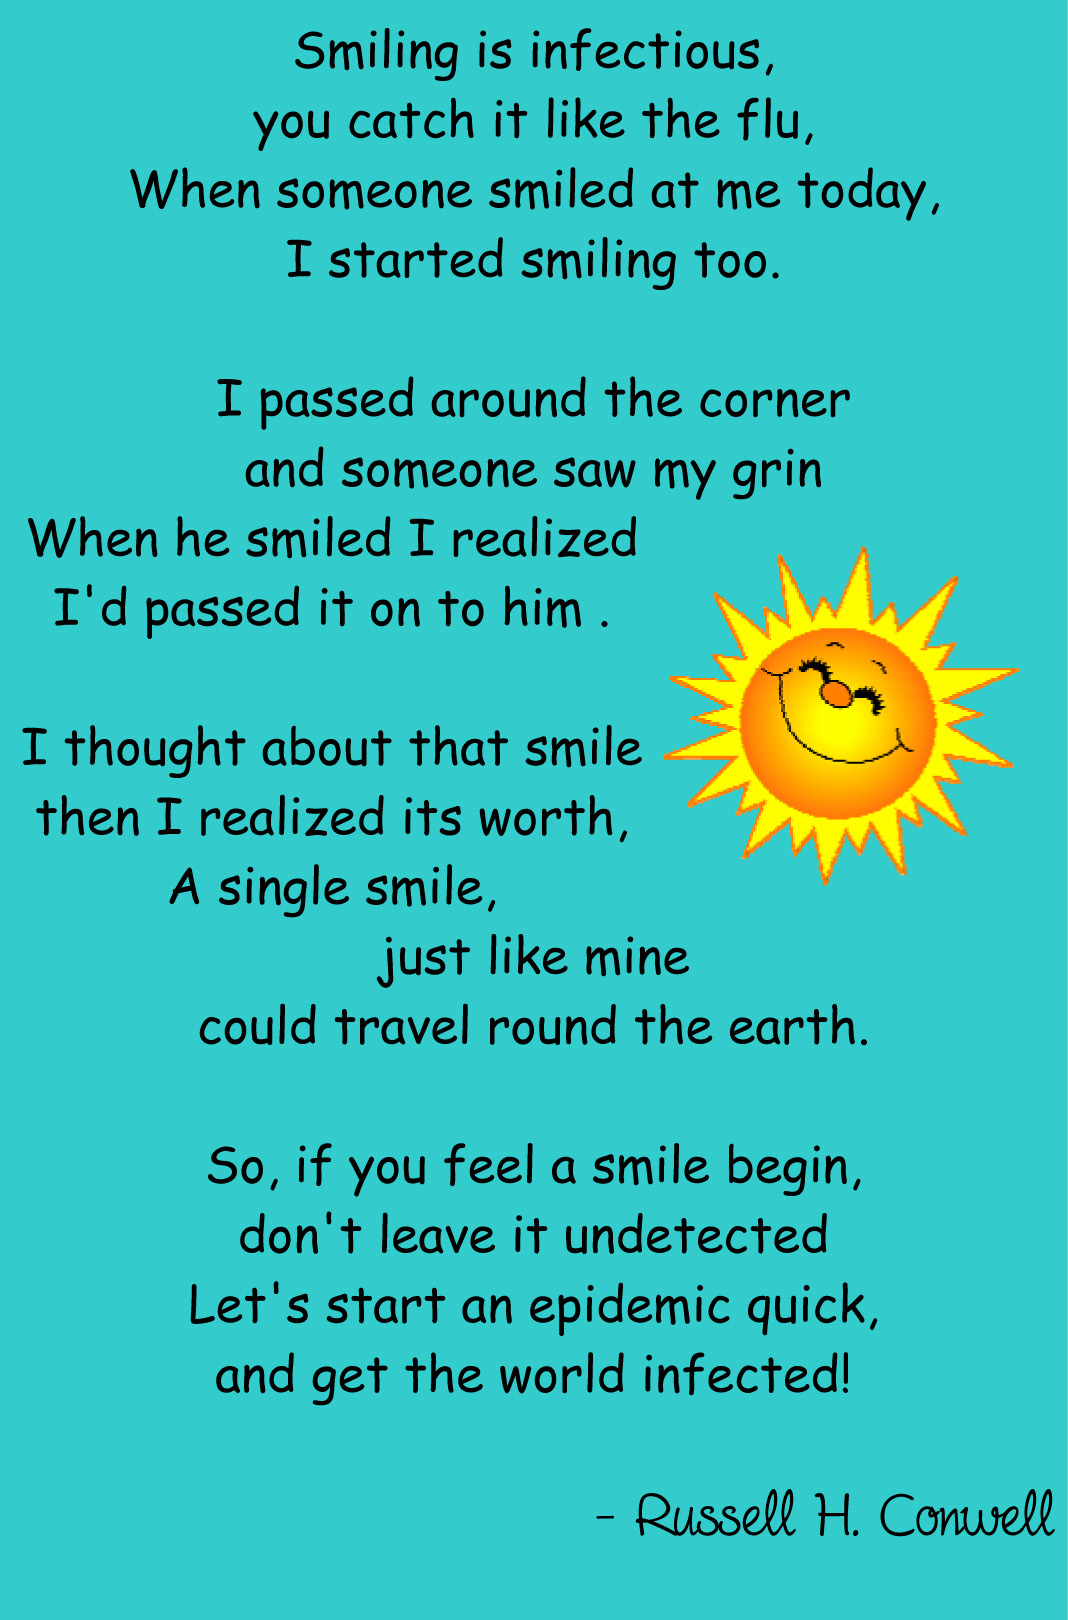 Poem Passing On A Smile